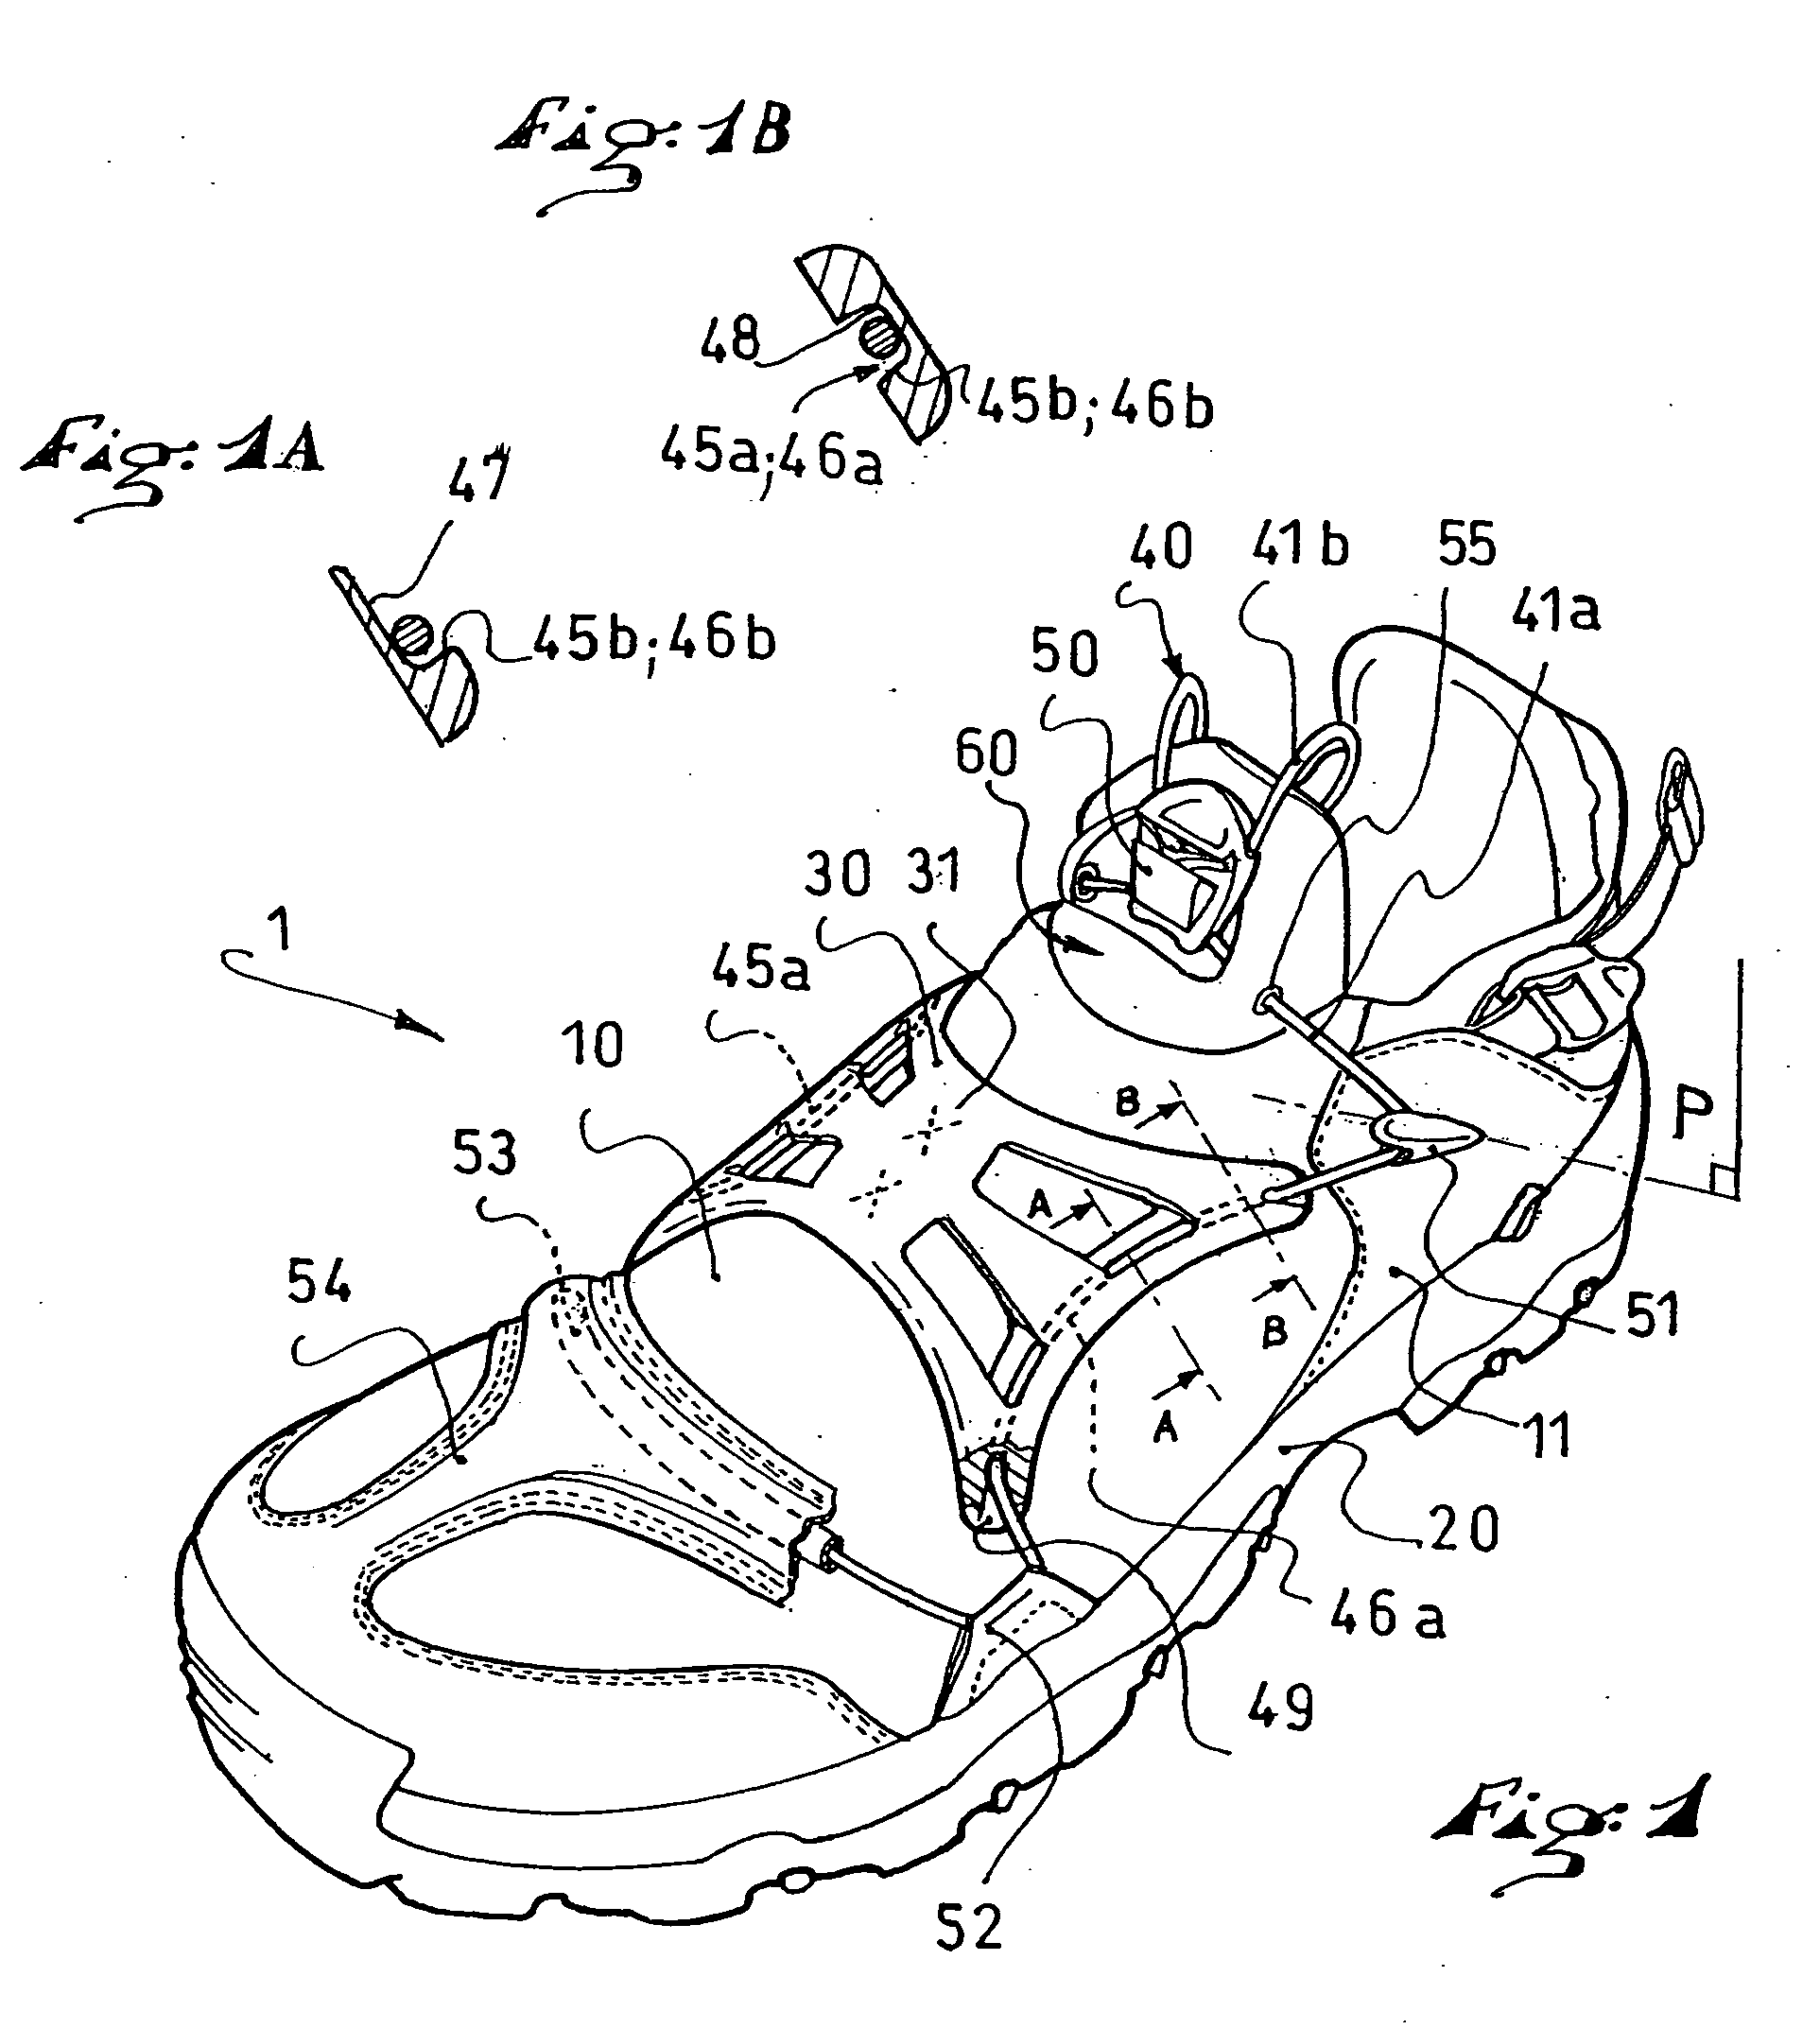 Article of footwear and lacing system therefor